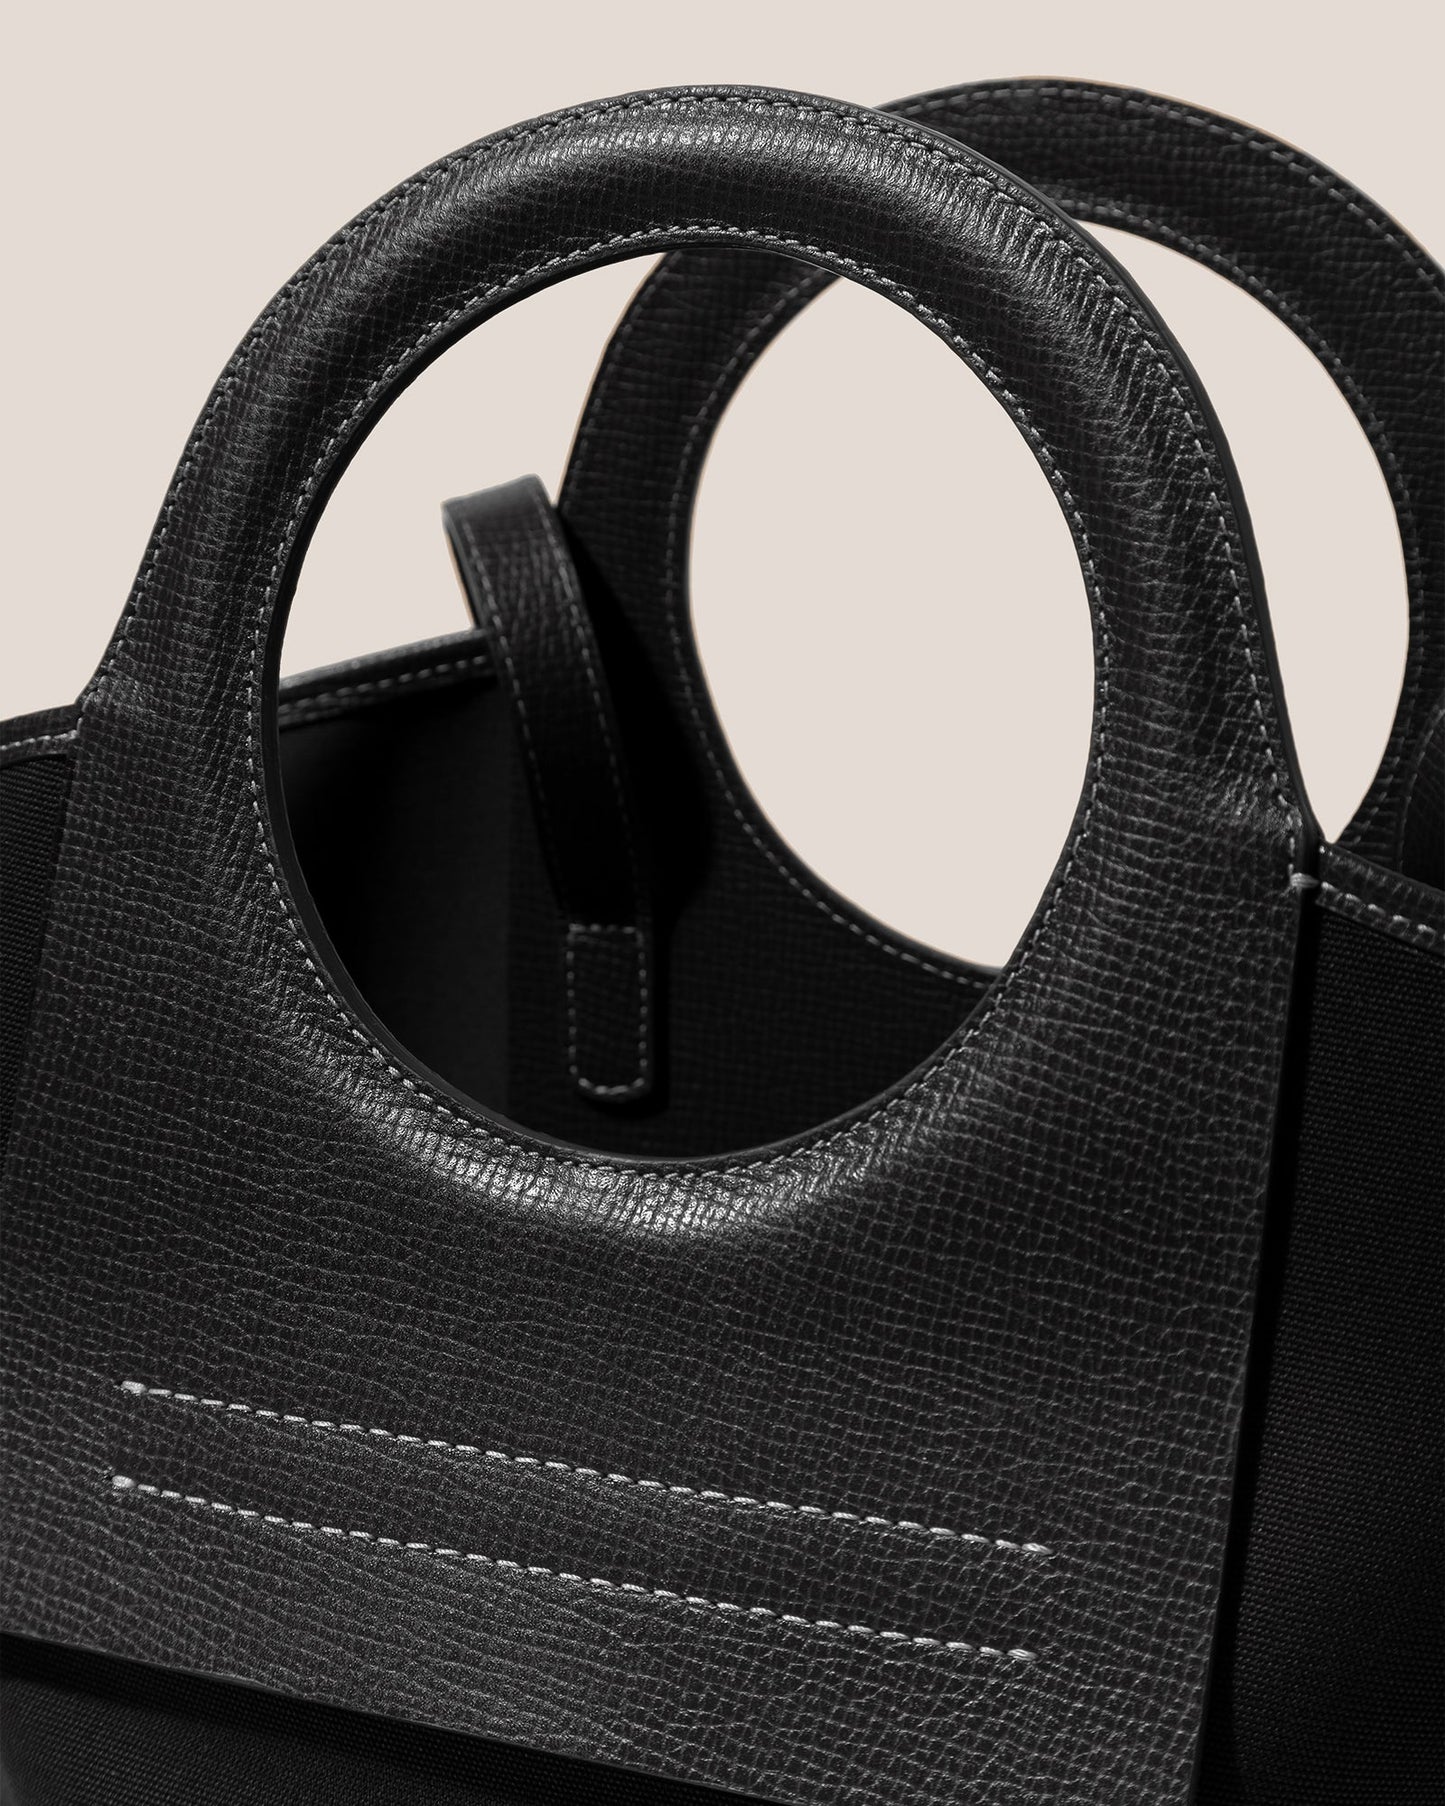 CALA S GRAINY - Leather-trimmed Canvas Tote Bag